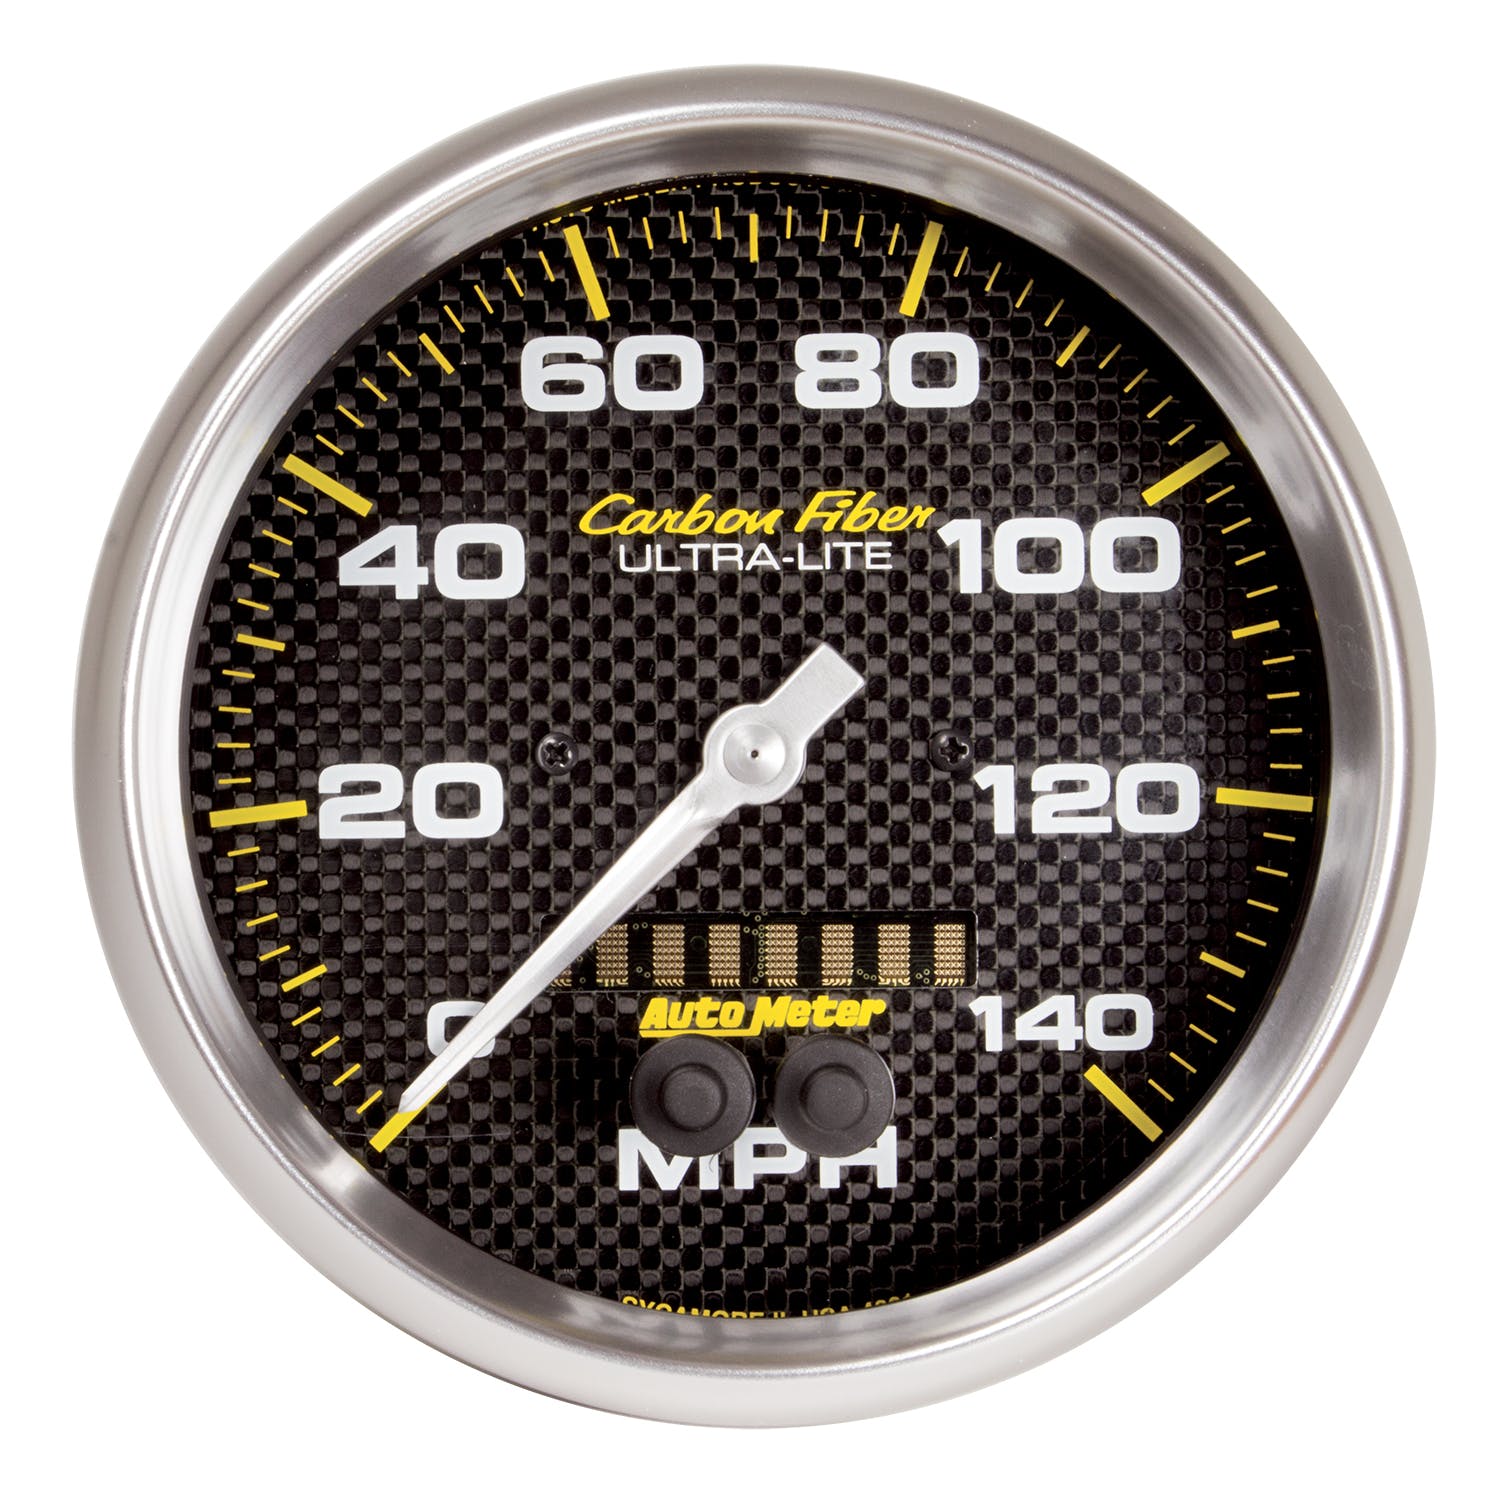 AutoMeter Products 4881 Speedometer Gauge, 5in, 140mph, GPS, Carbon Fiber